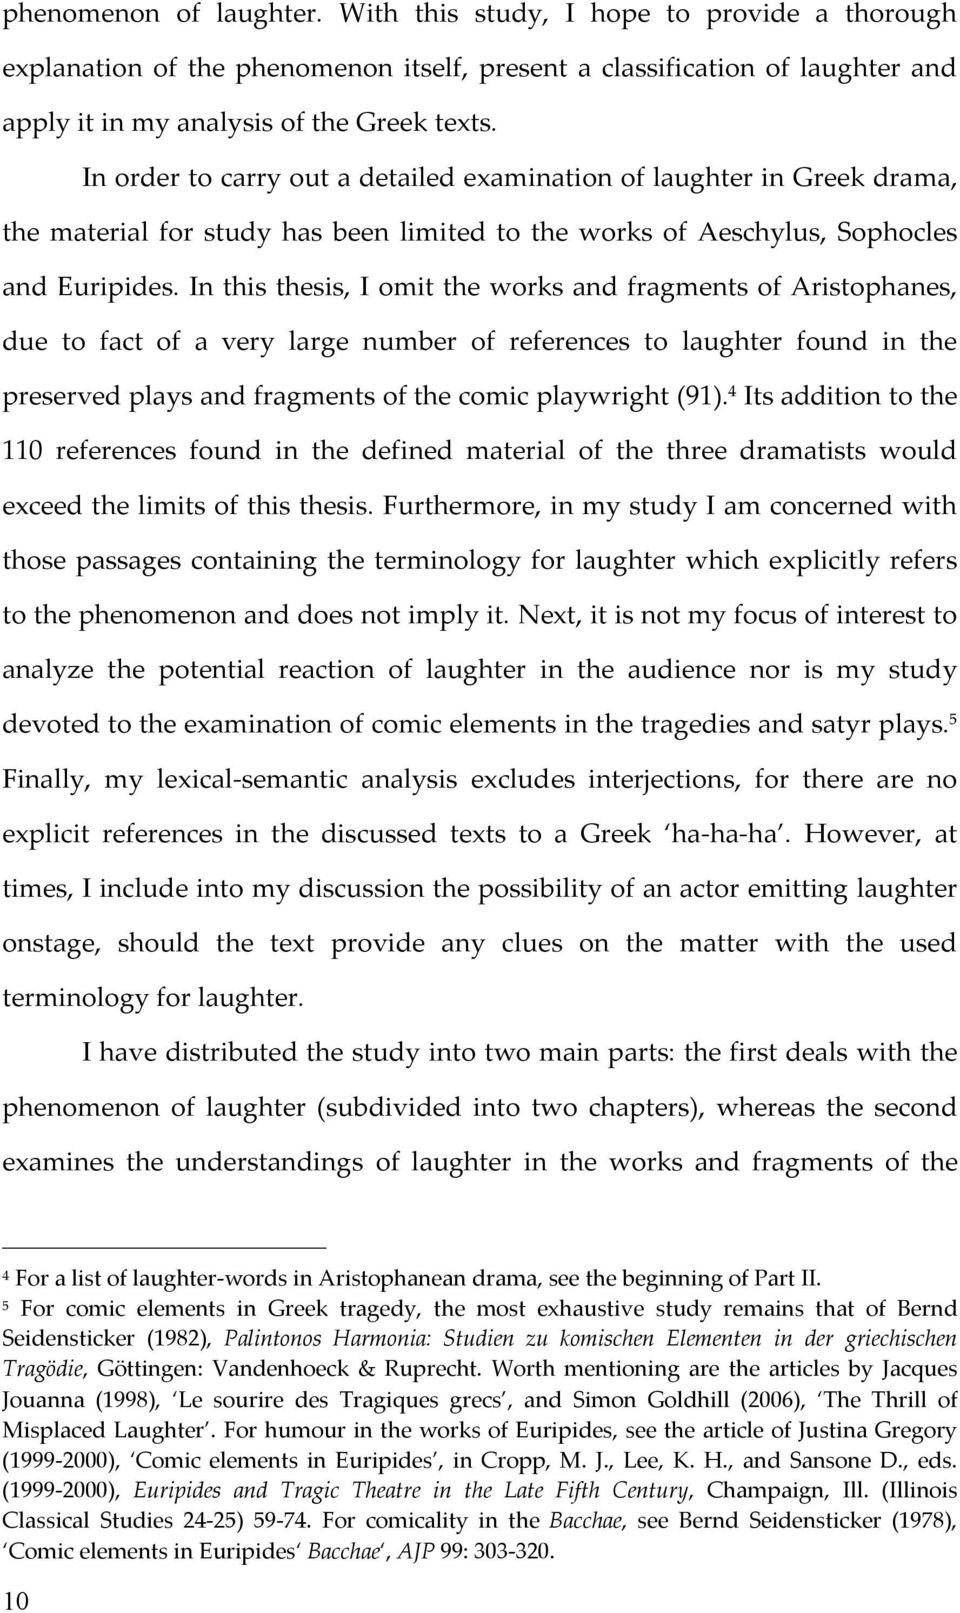 In this thesis, I omit the works and fragments of Aristophanes, due to fact of a very large number of references to laughter found in the preserved plays and fragments of the comic playwright (91).